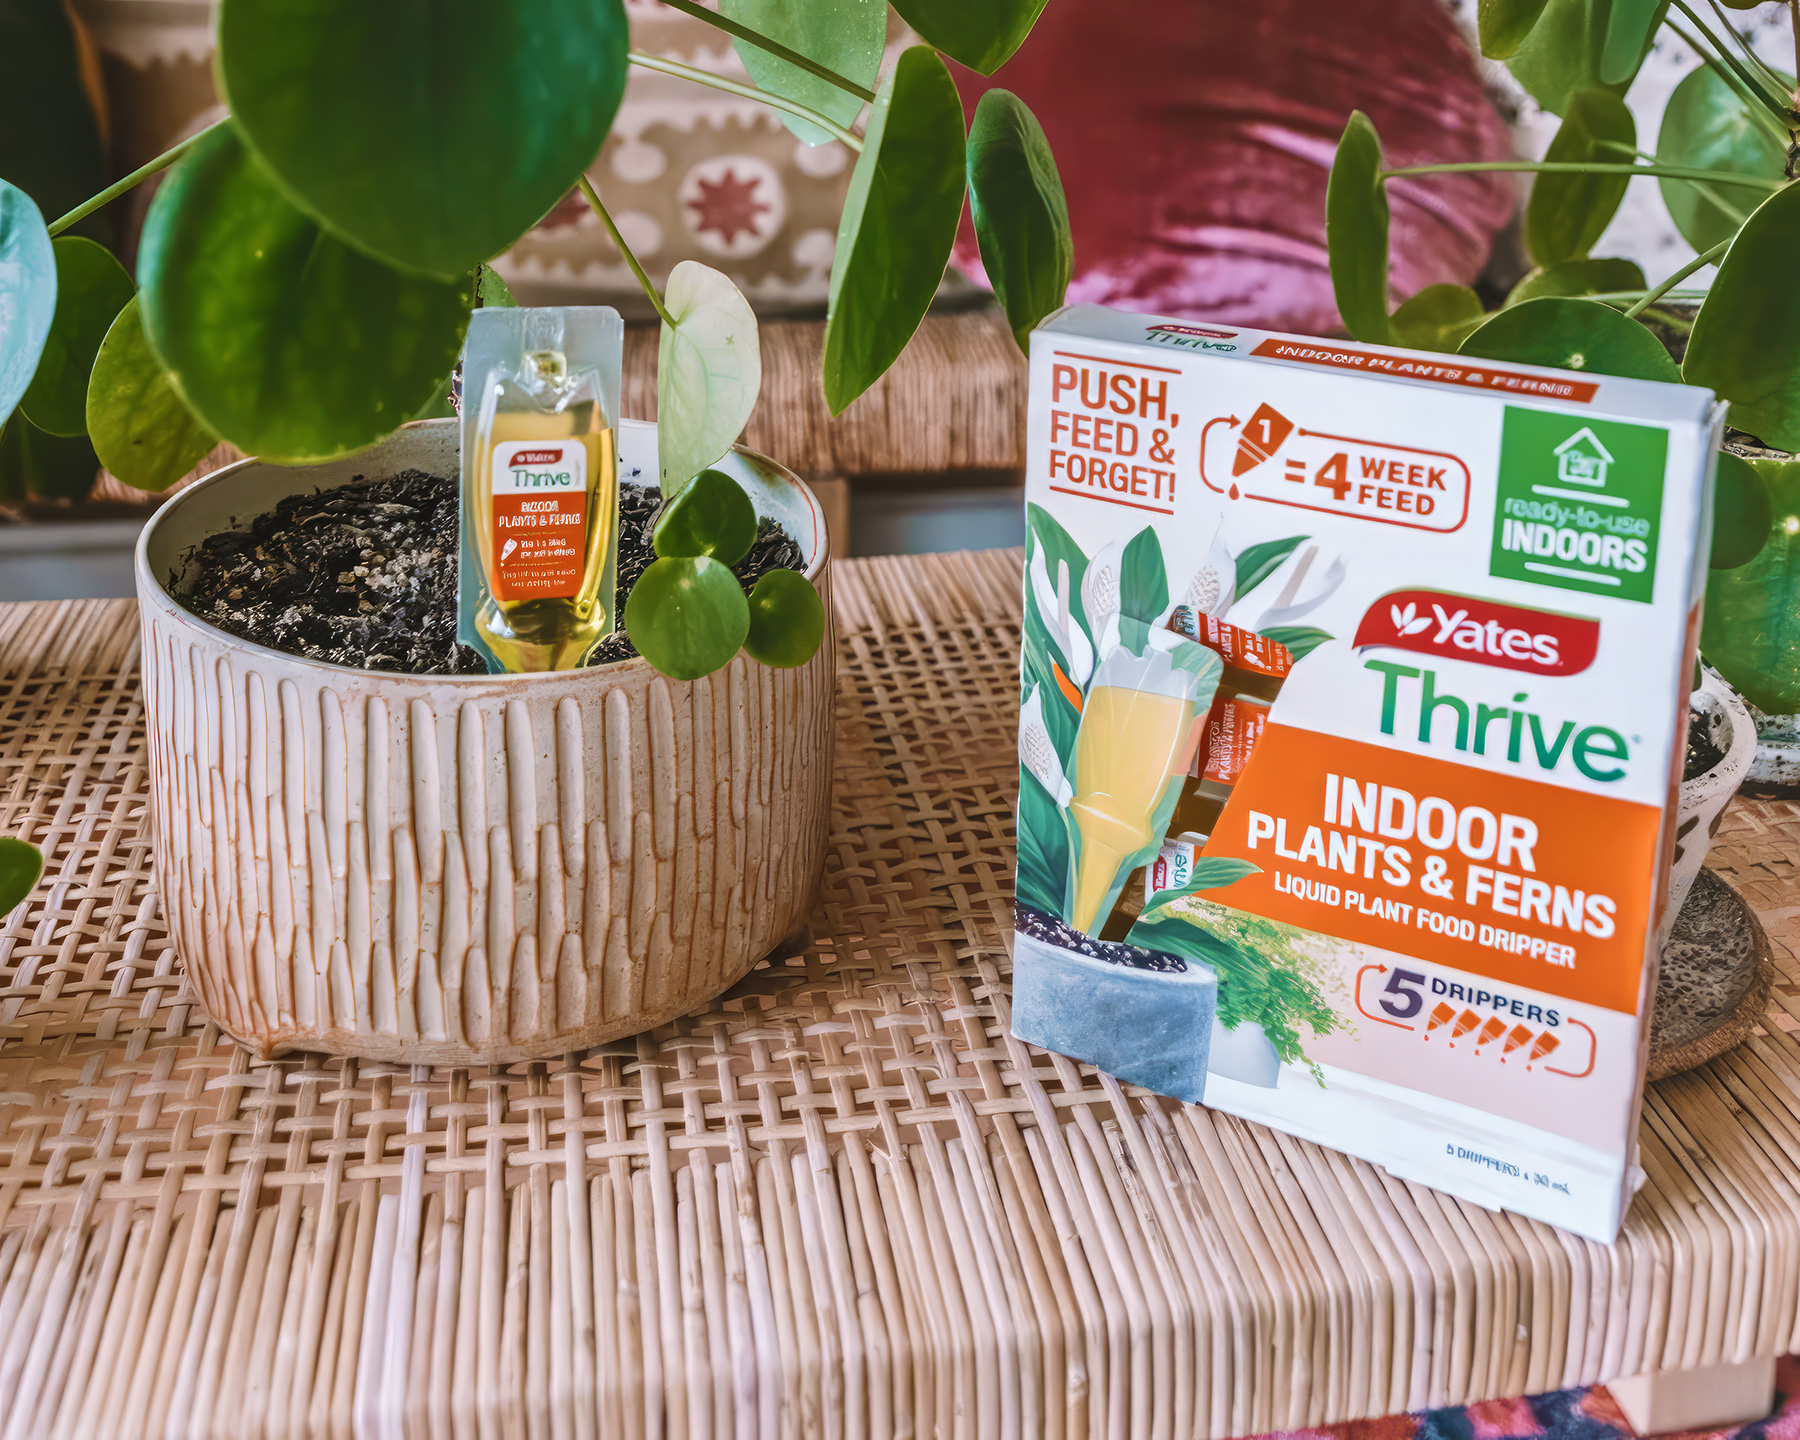 Thrive Indoor Plant Food Drippers